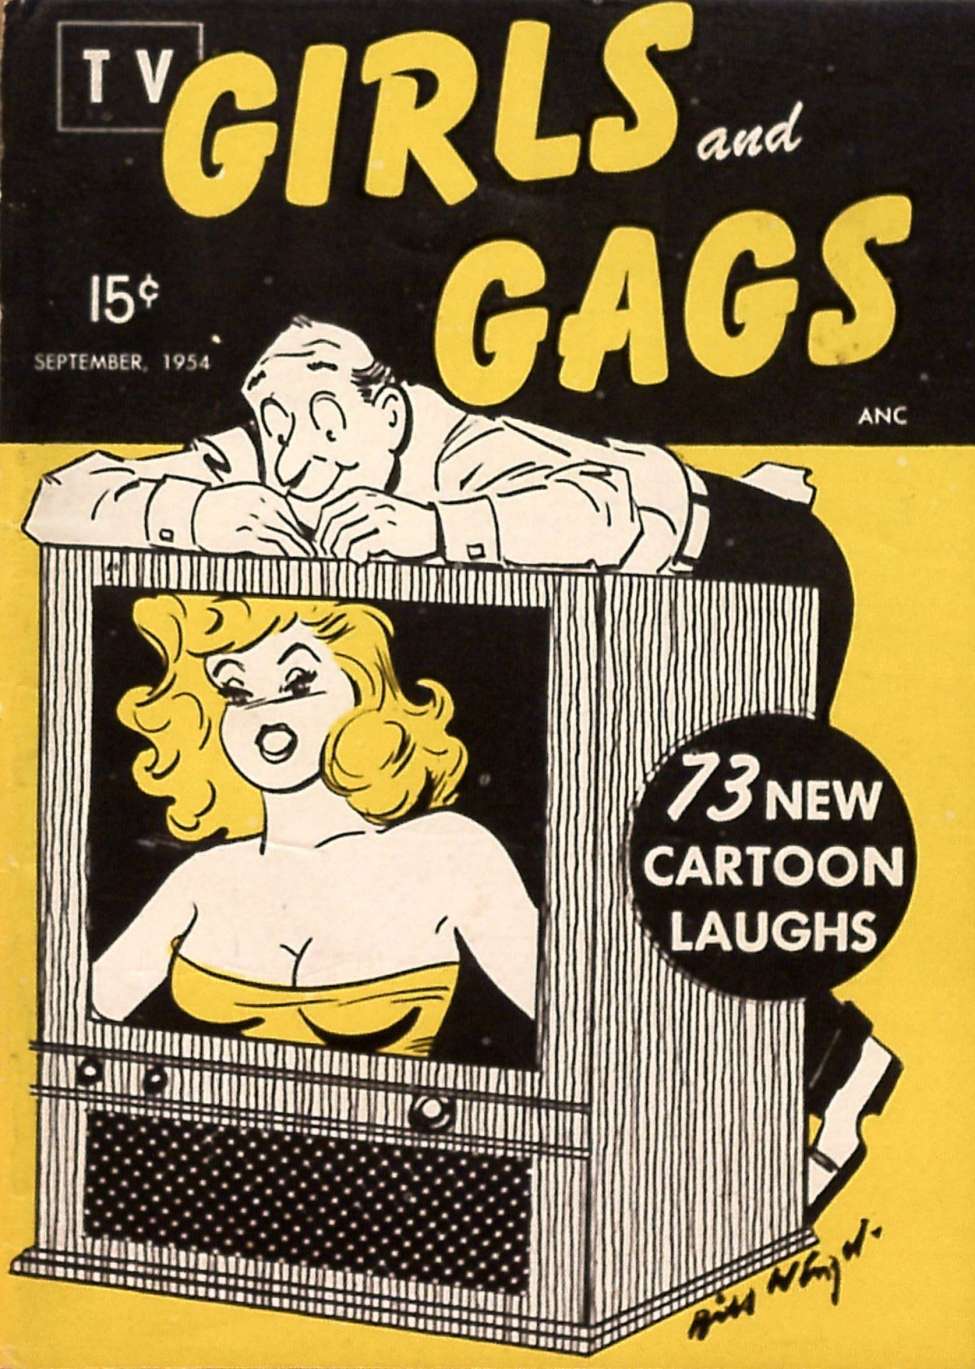 Book Cover For TV Girls and Gags v1 2